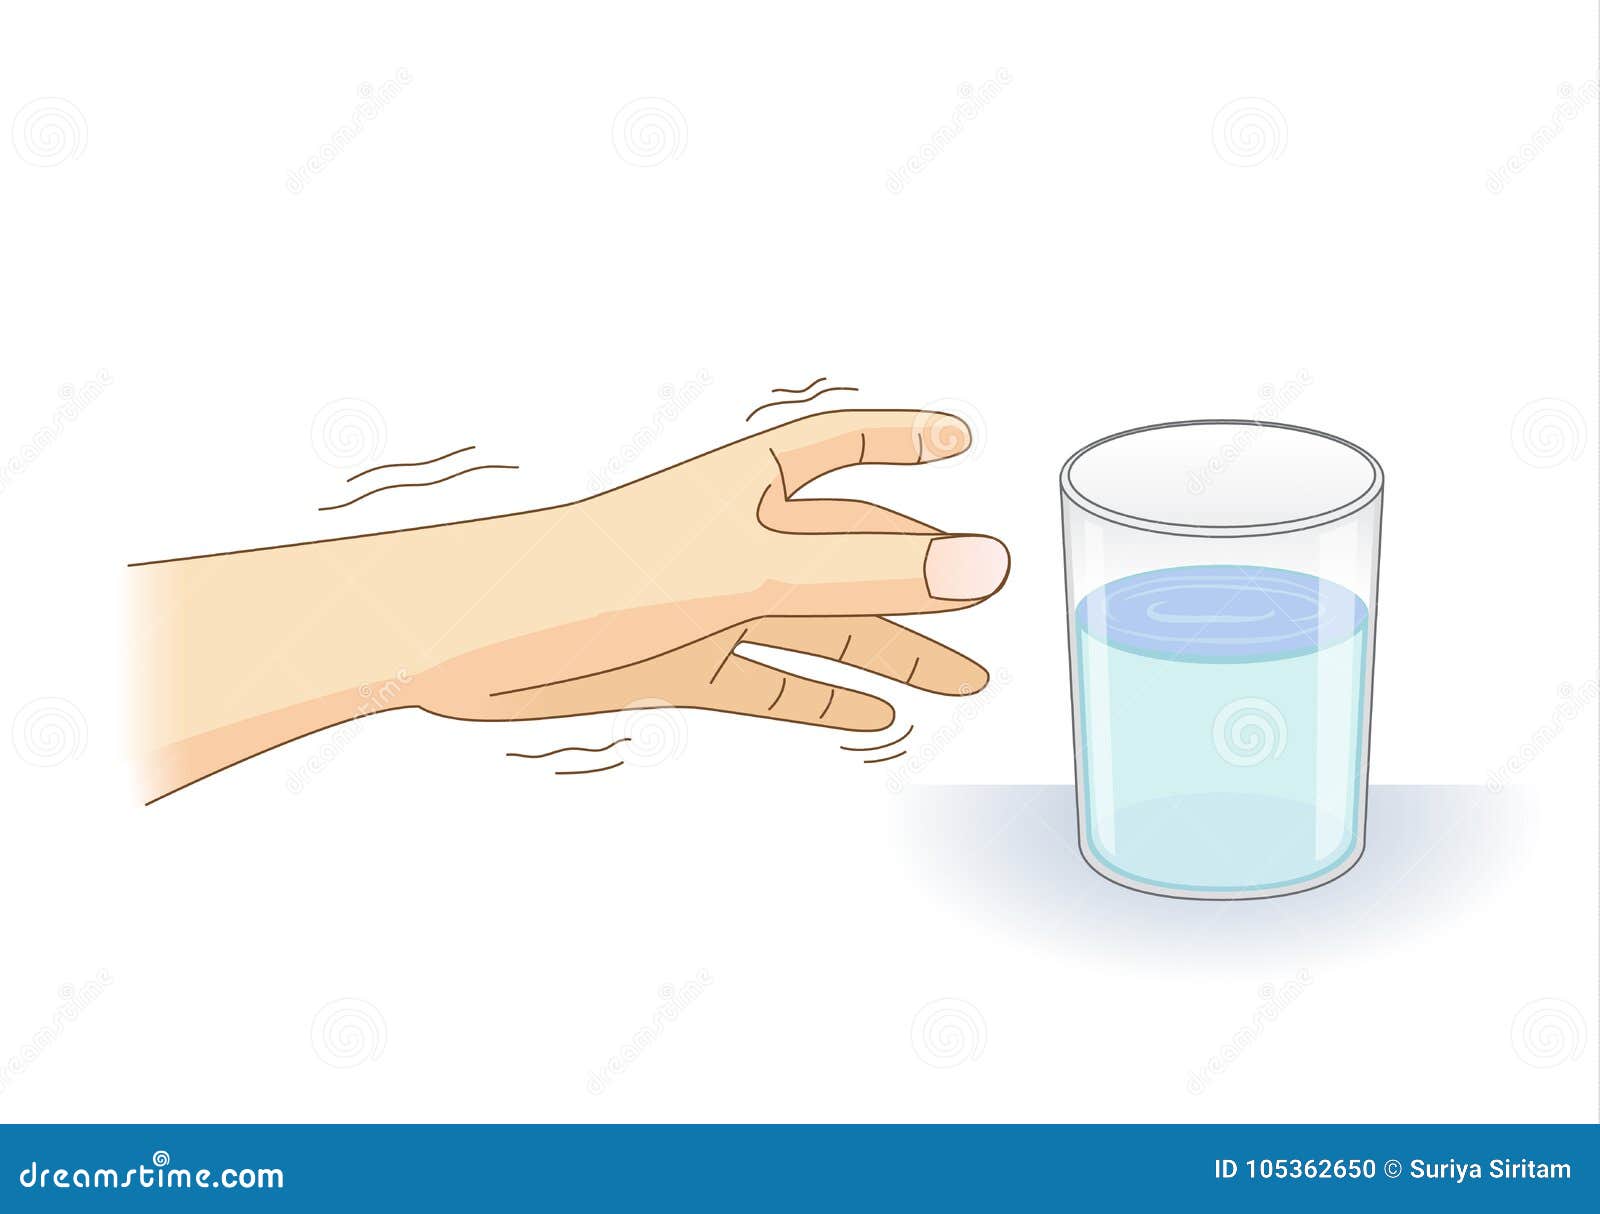 a hand have tremor symptom reaching out for a glass of water.